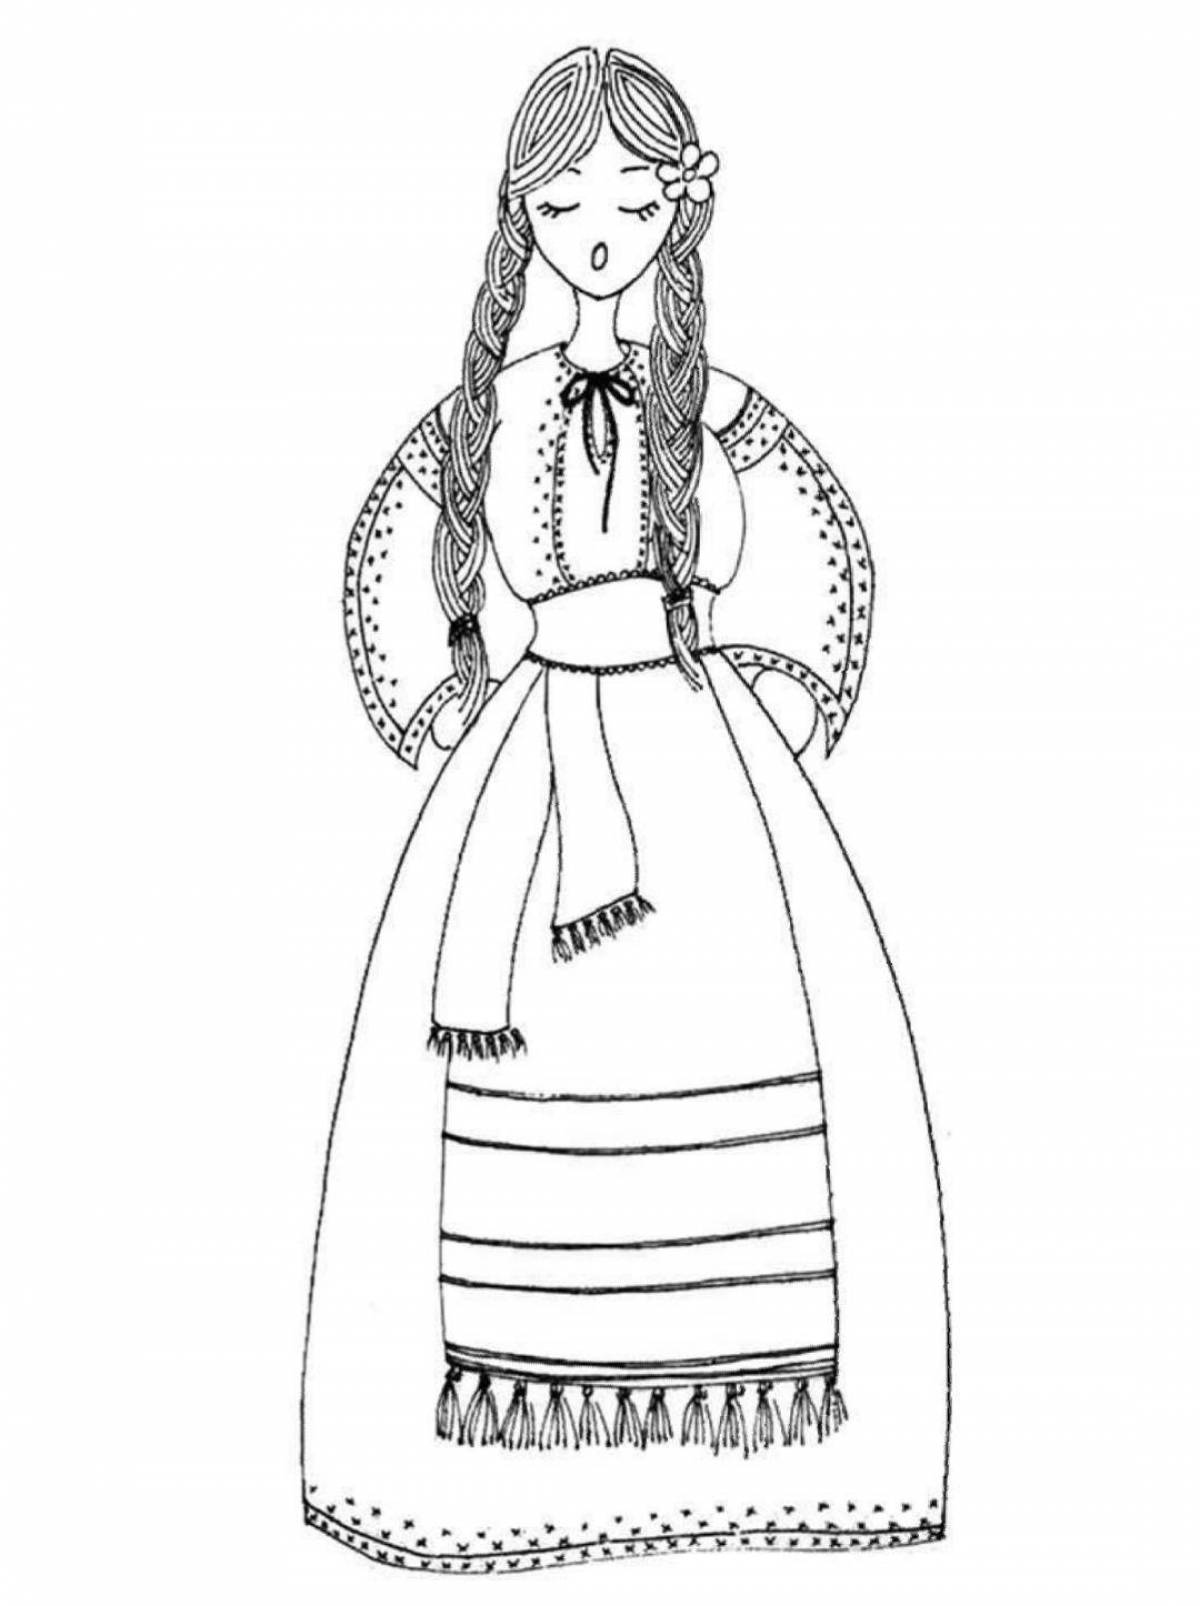 Coloring page embellished Russian sundress